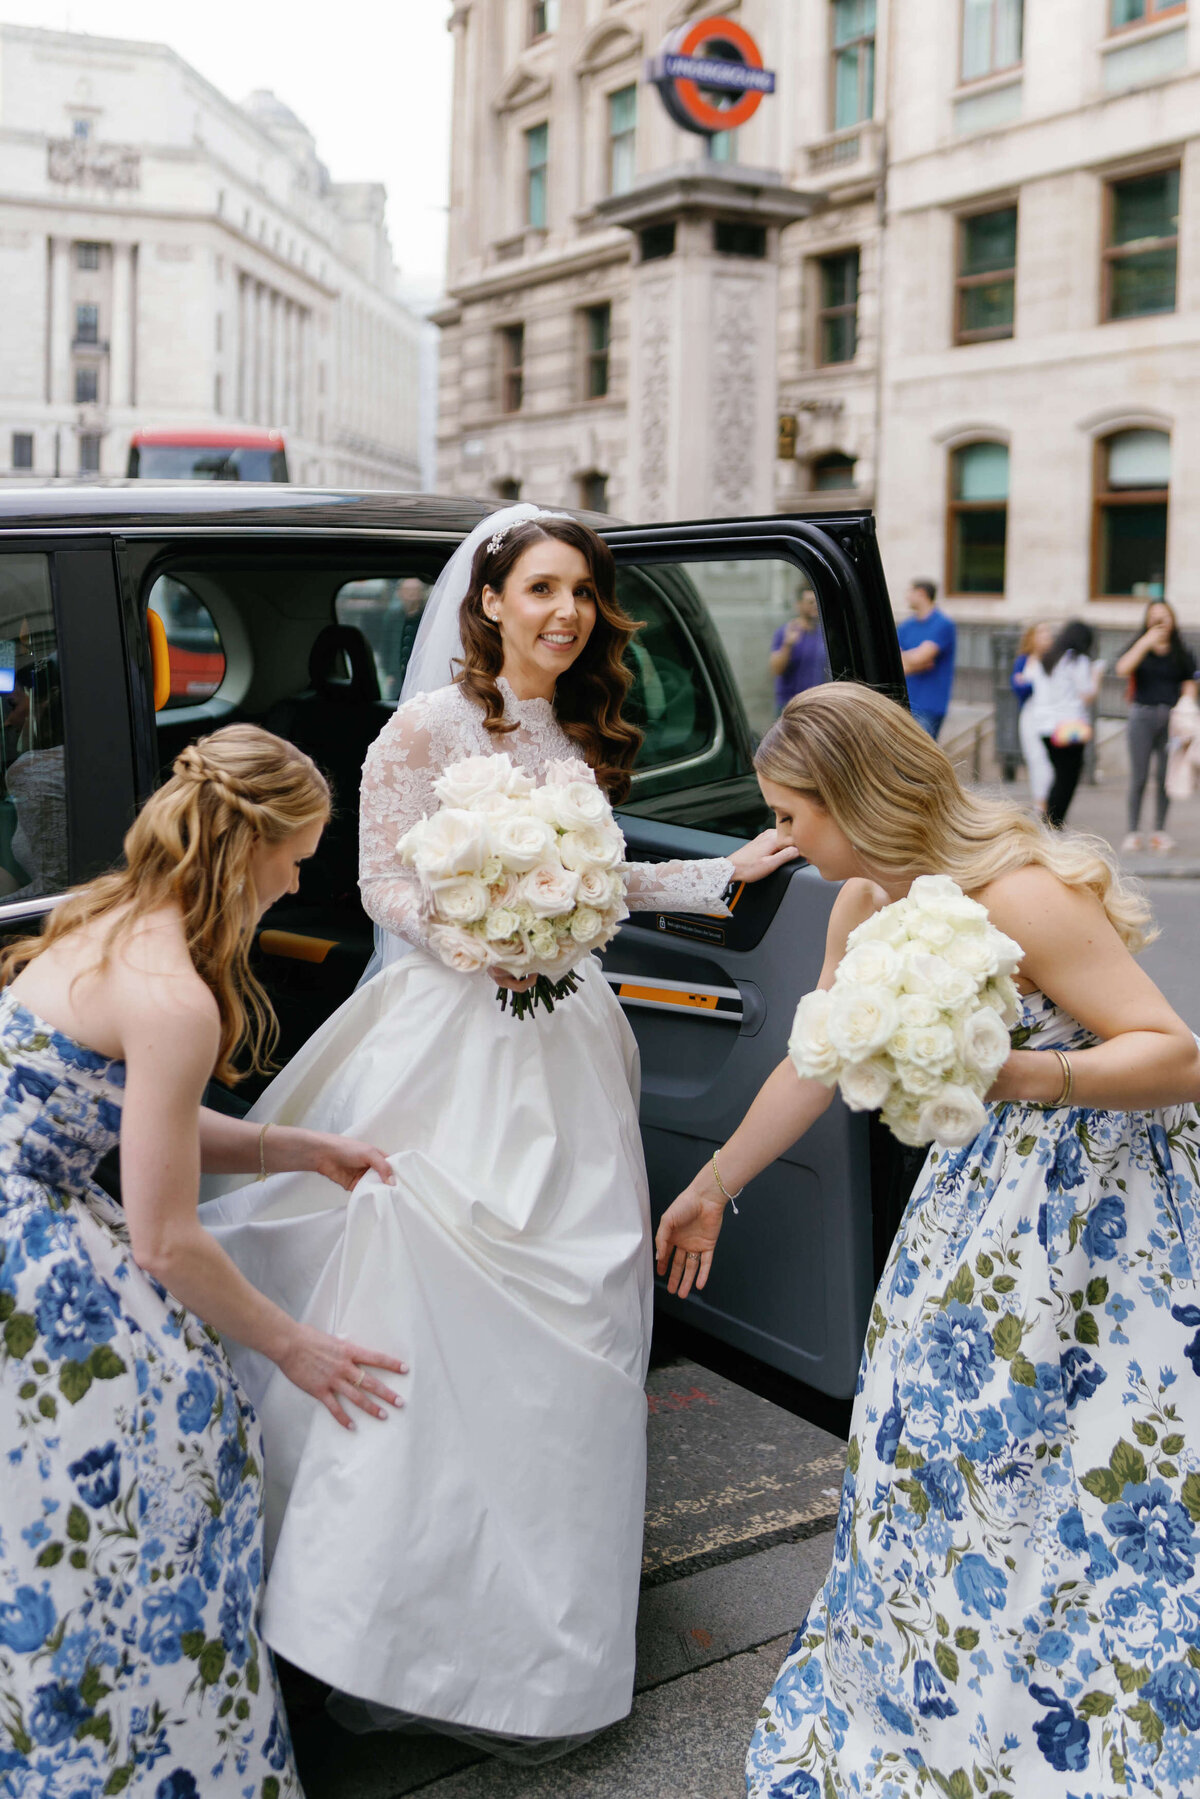 bridesmaids in blue patterned dresses help the bride exit her cab as she arrives at her chic city wedding ceremony in a traditional london black cab